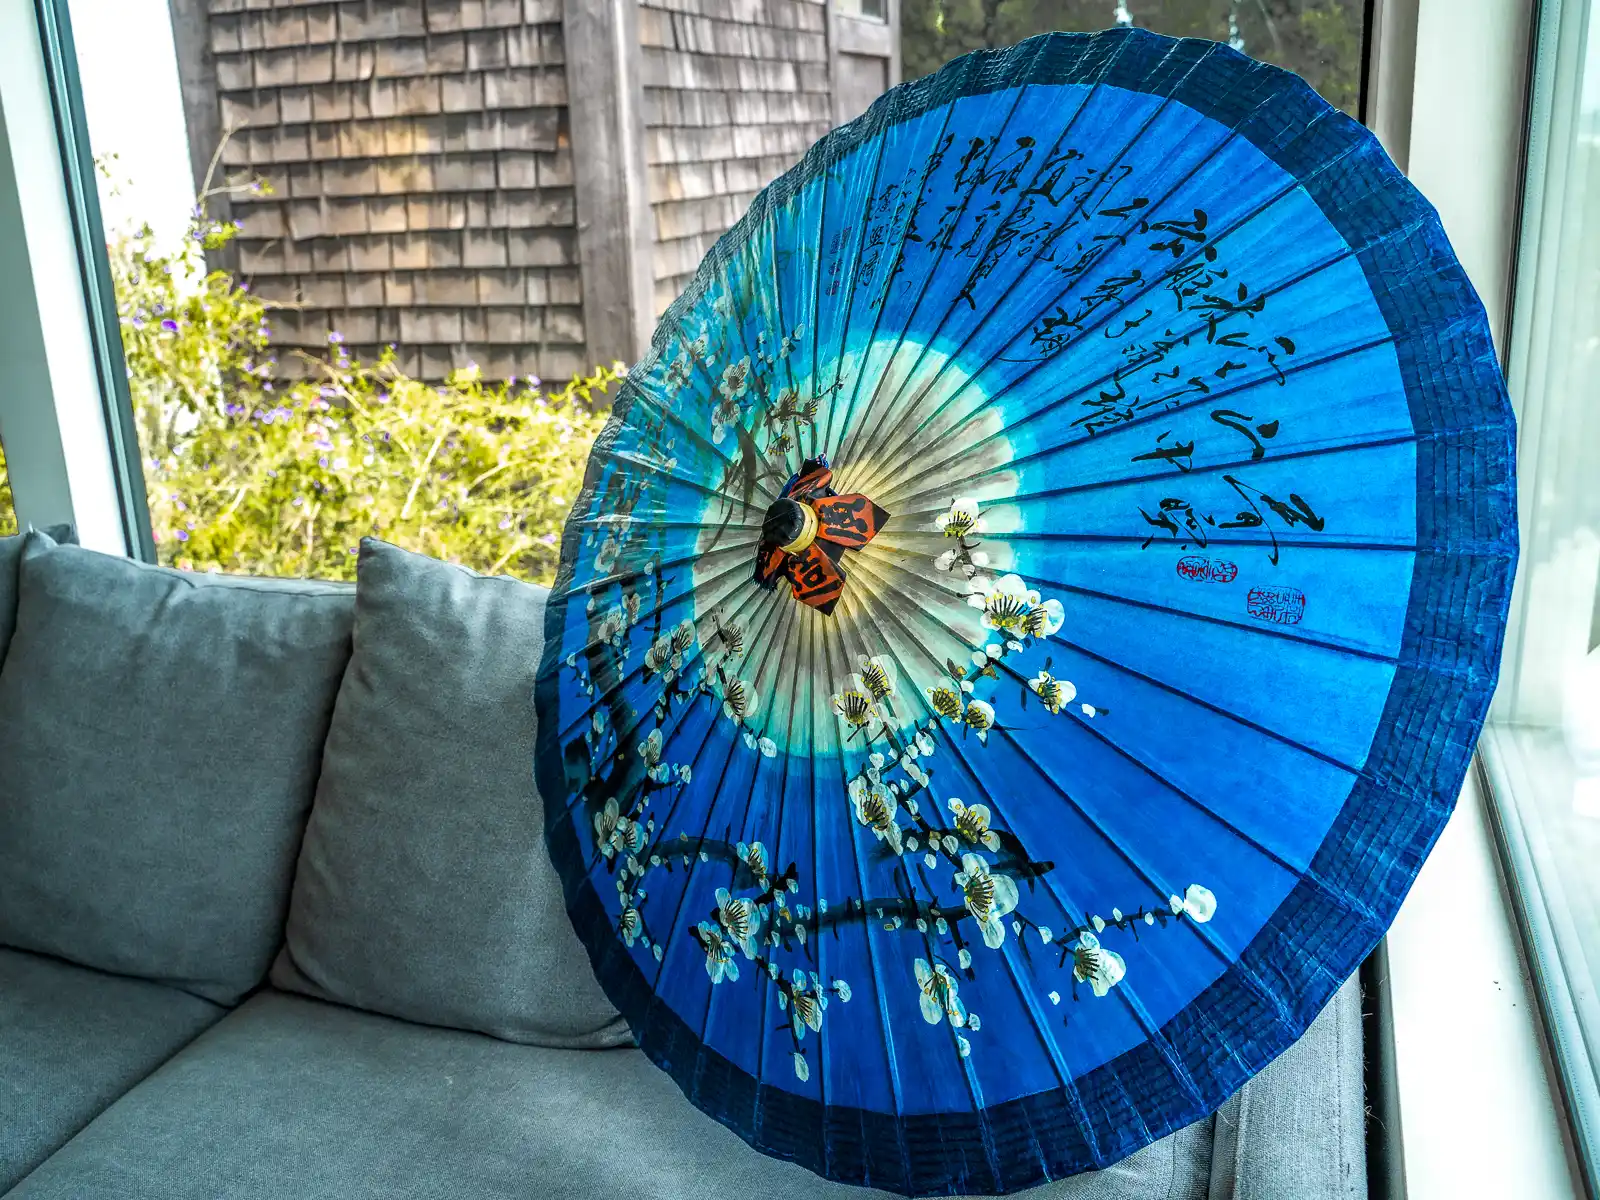 A beautiful indigo-colored oil-paper umbrella is on display indoors.